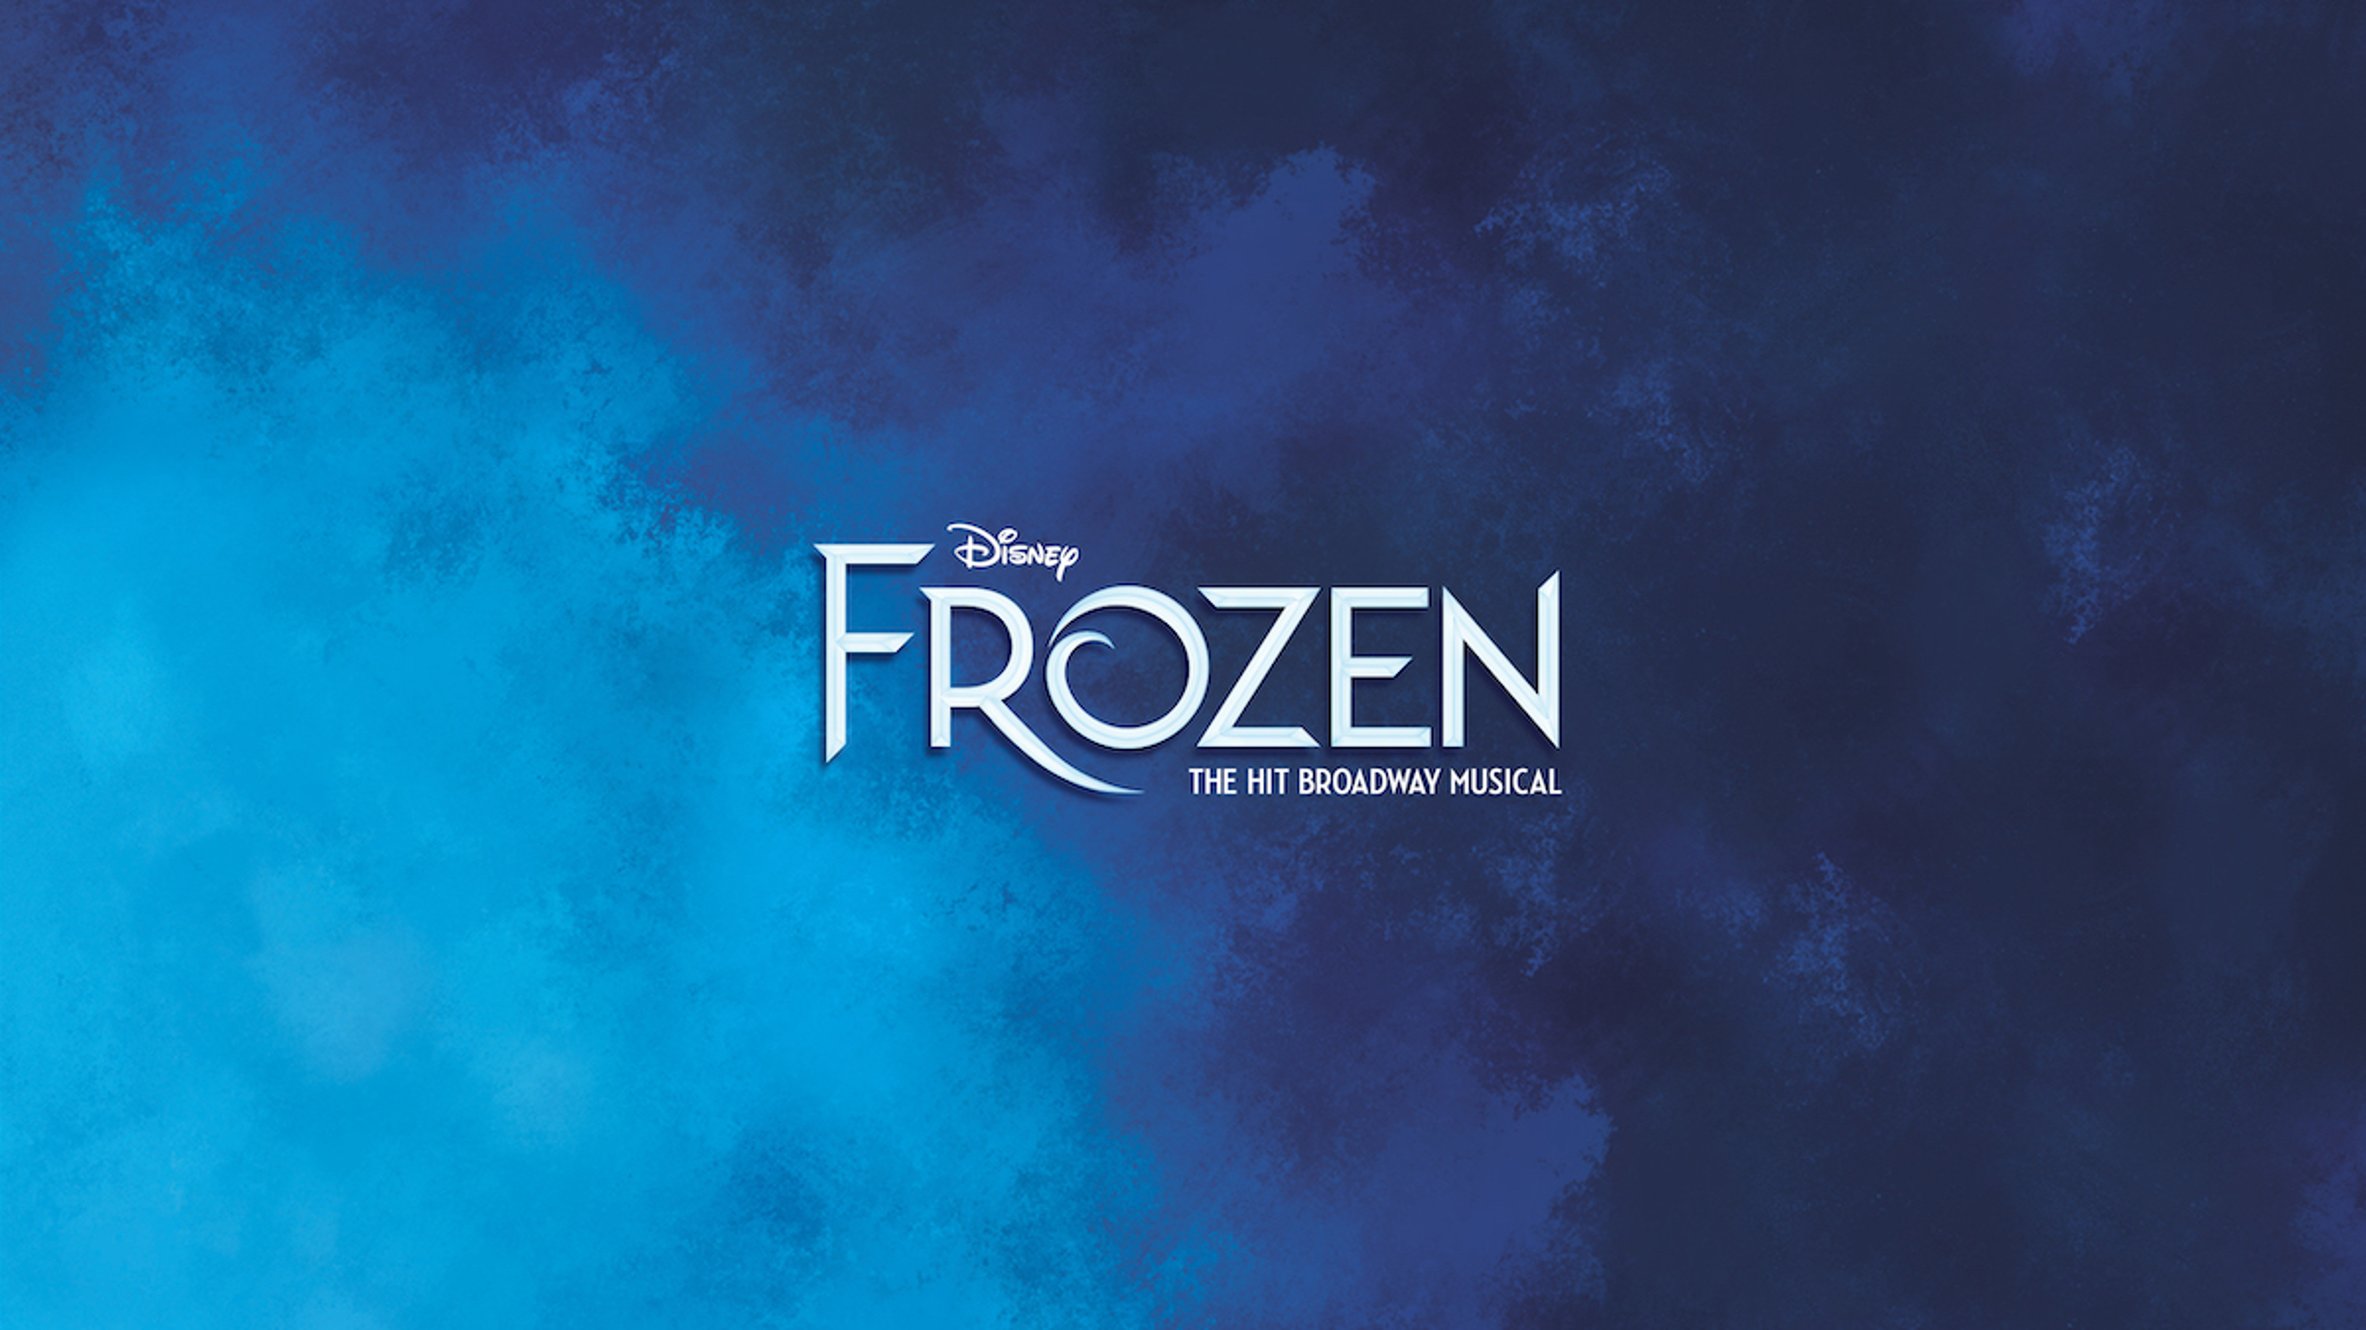 Casting Disney's Frozen the Musical! Roles Include Elsa, Anna, Kristoff, Olaf & More!